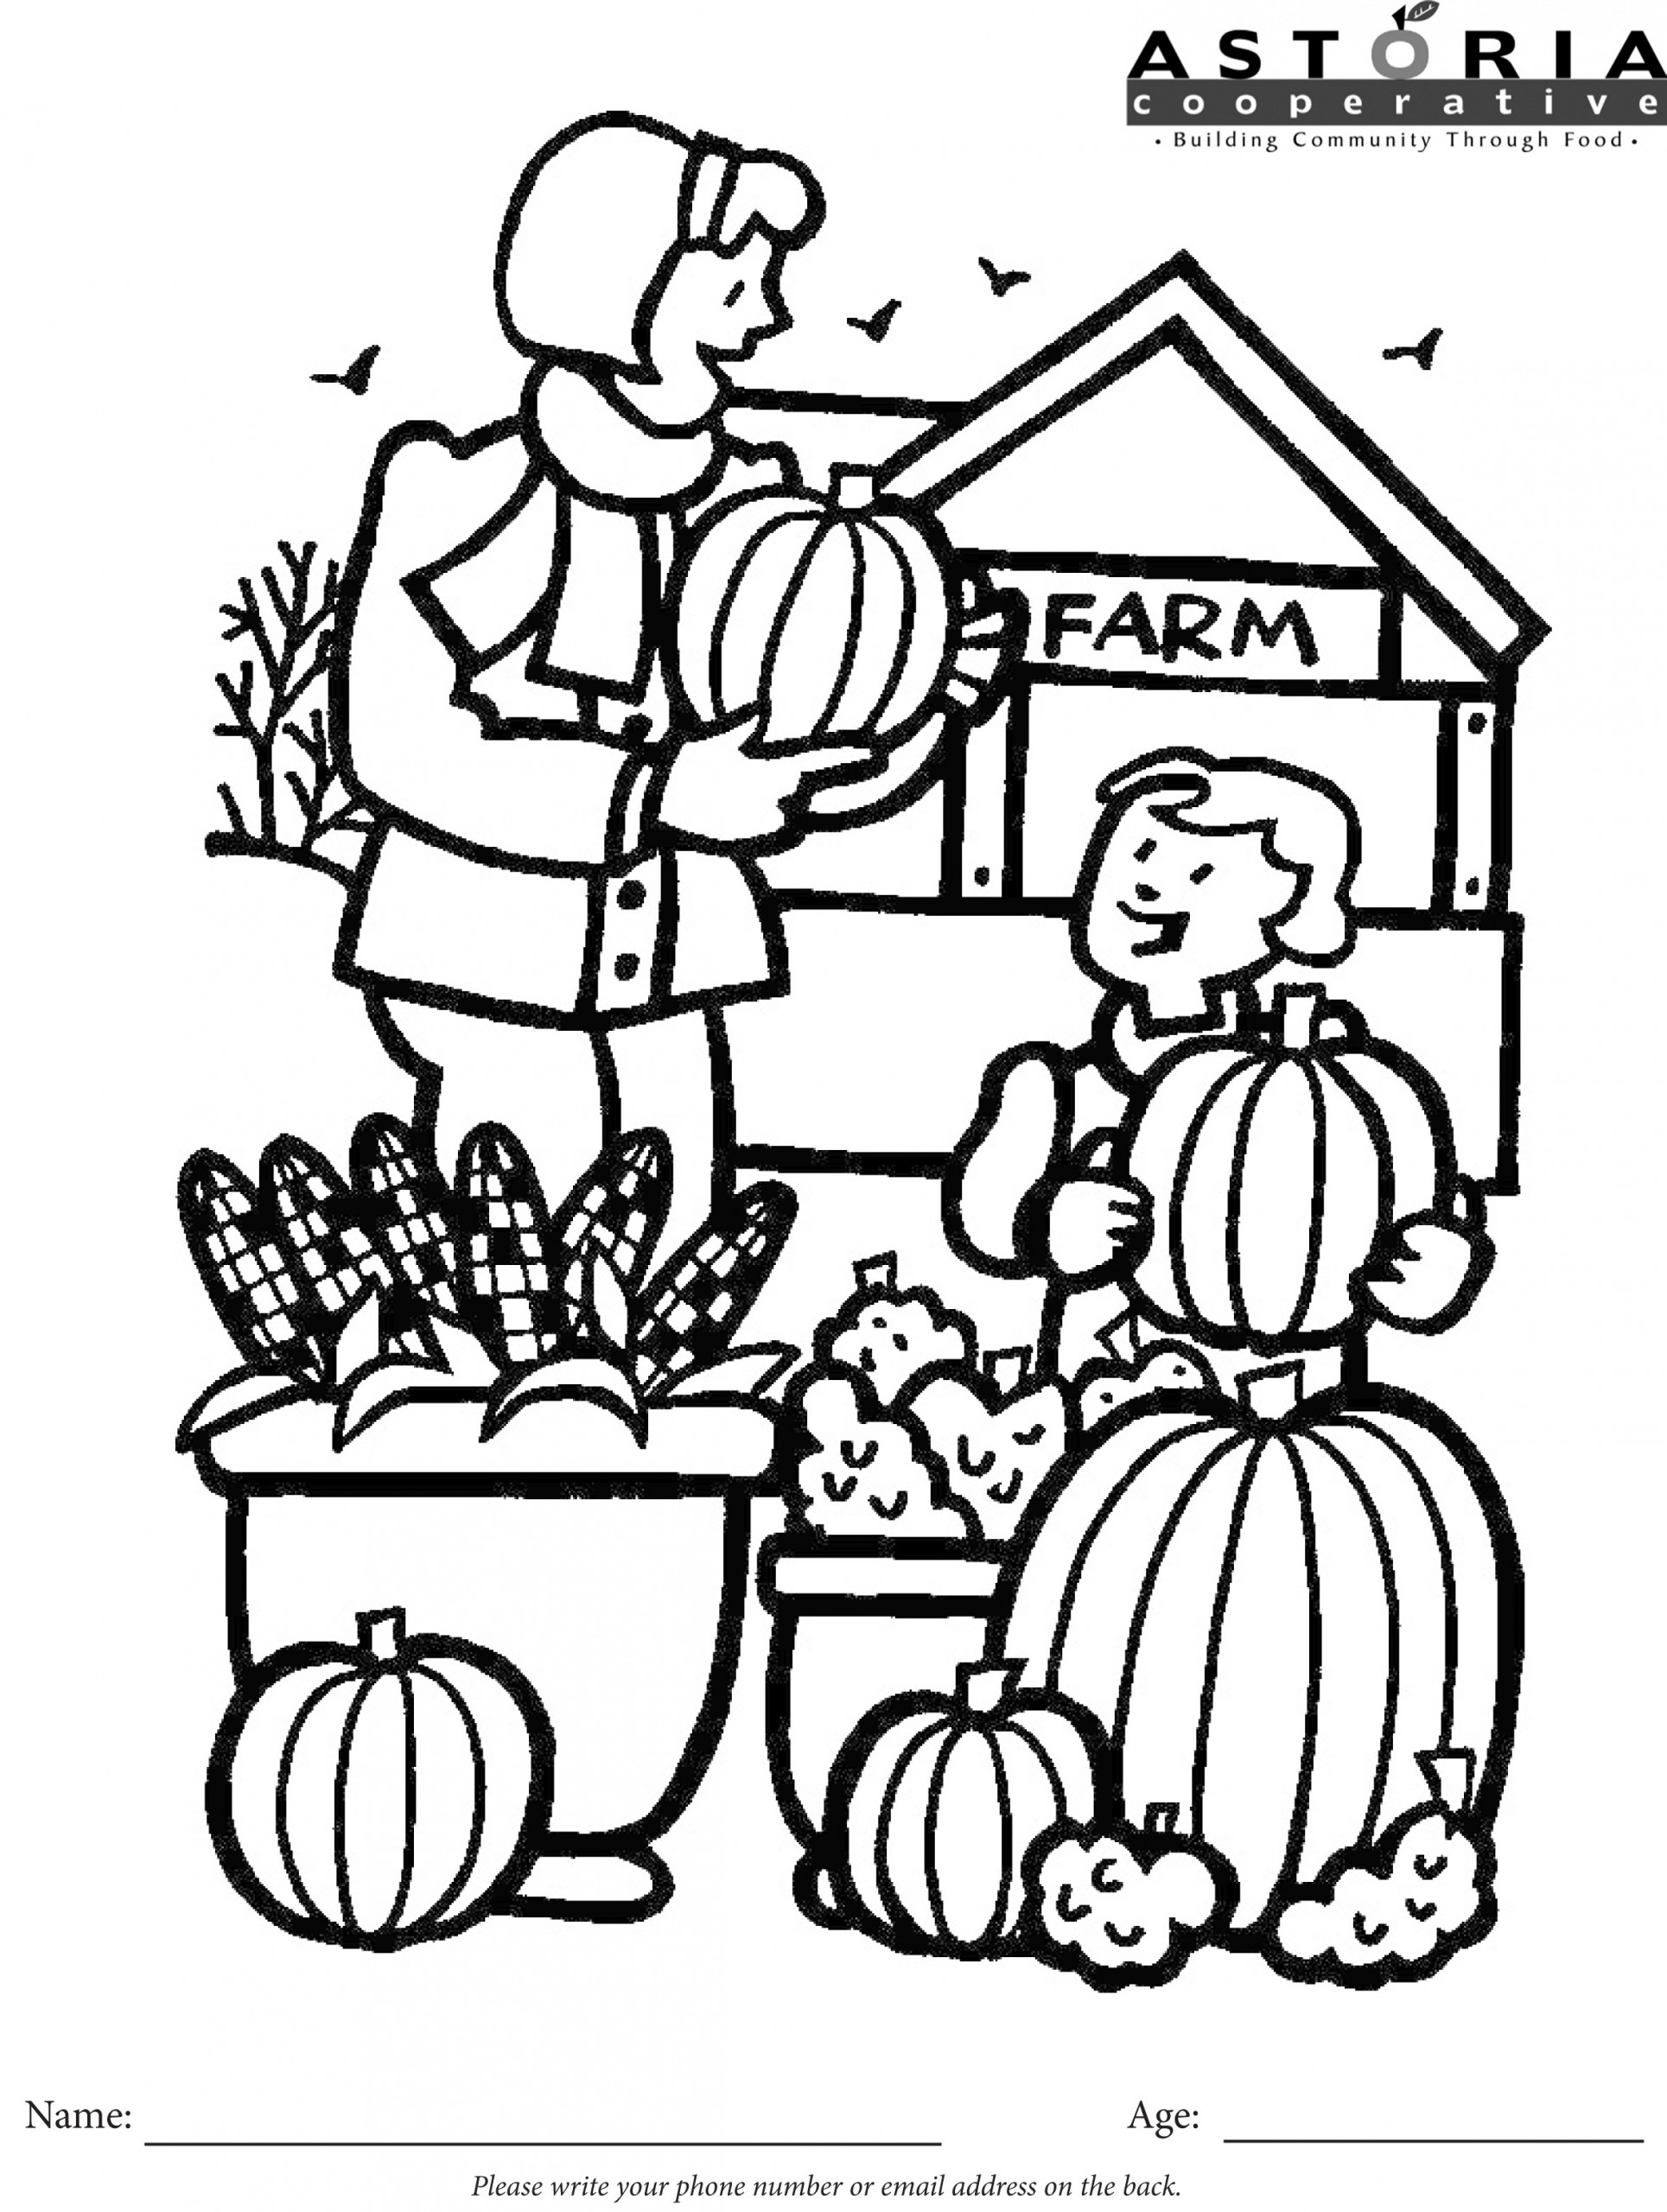 Grocery Coloring Pages At GetColorings Free 